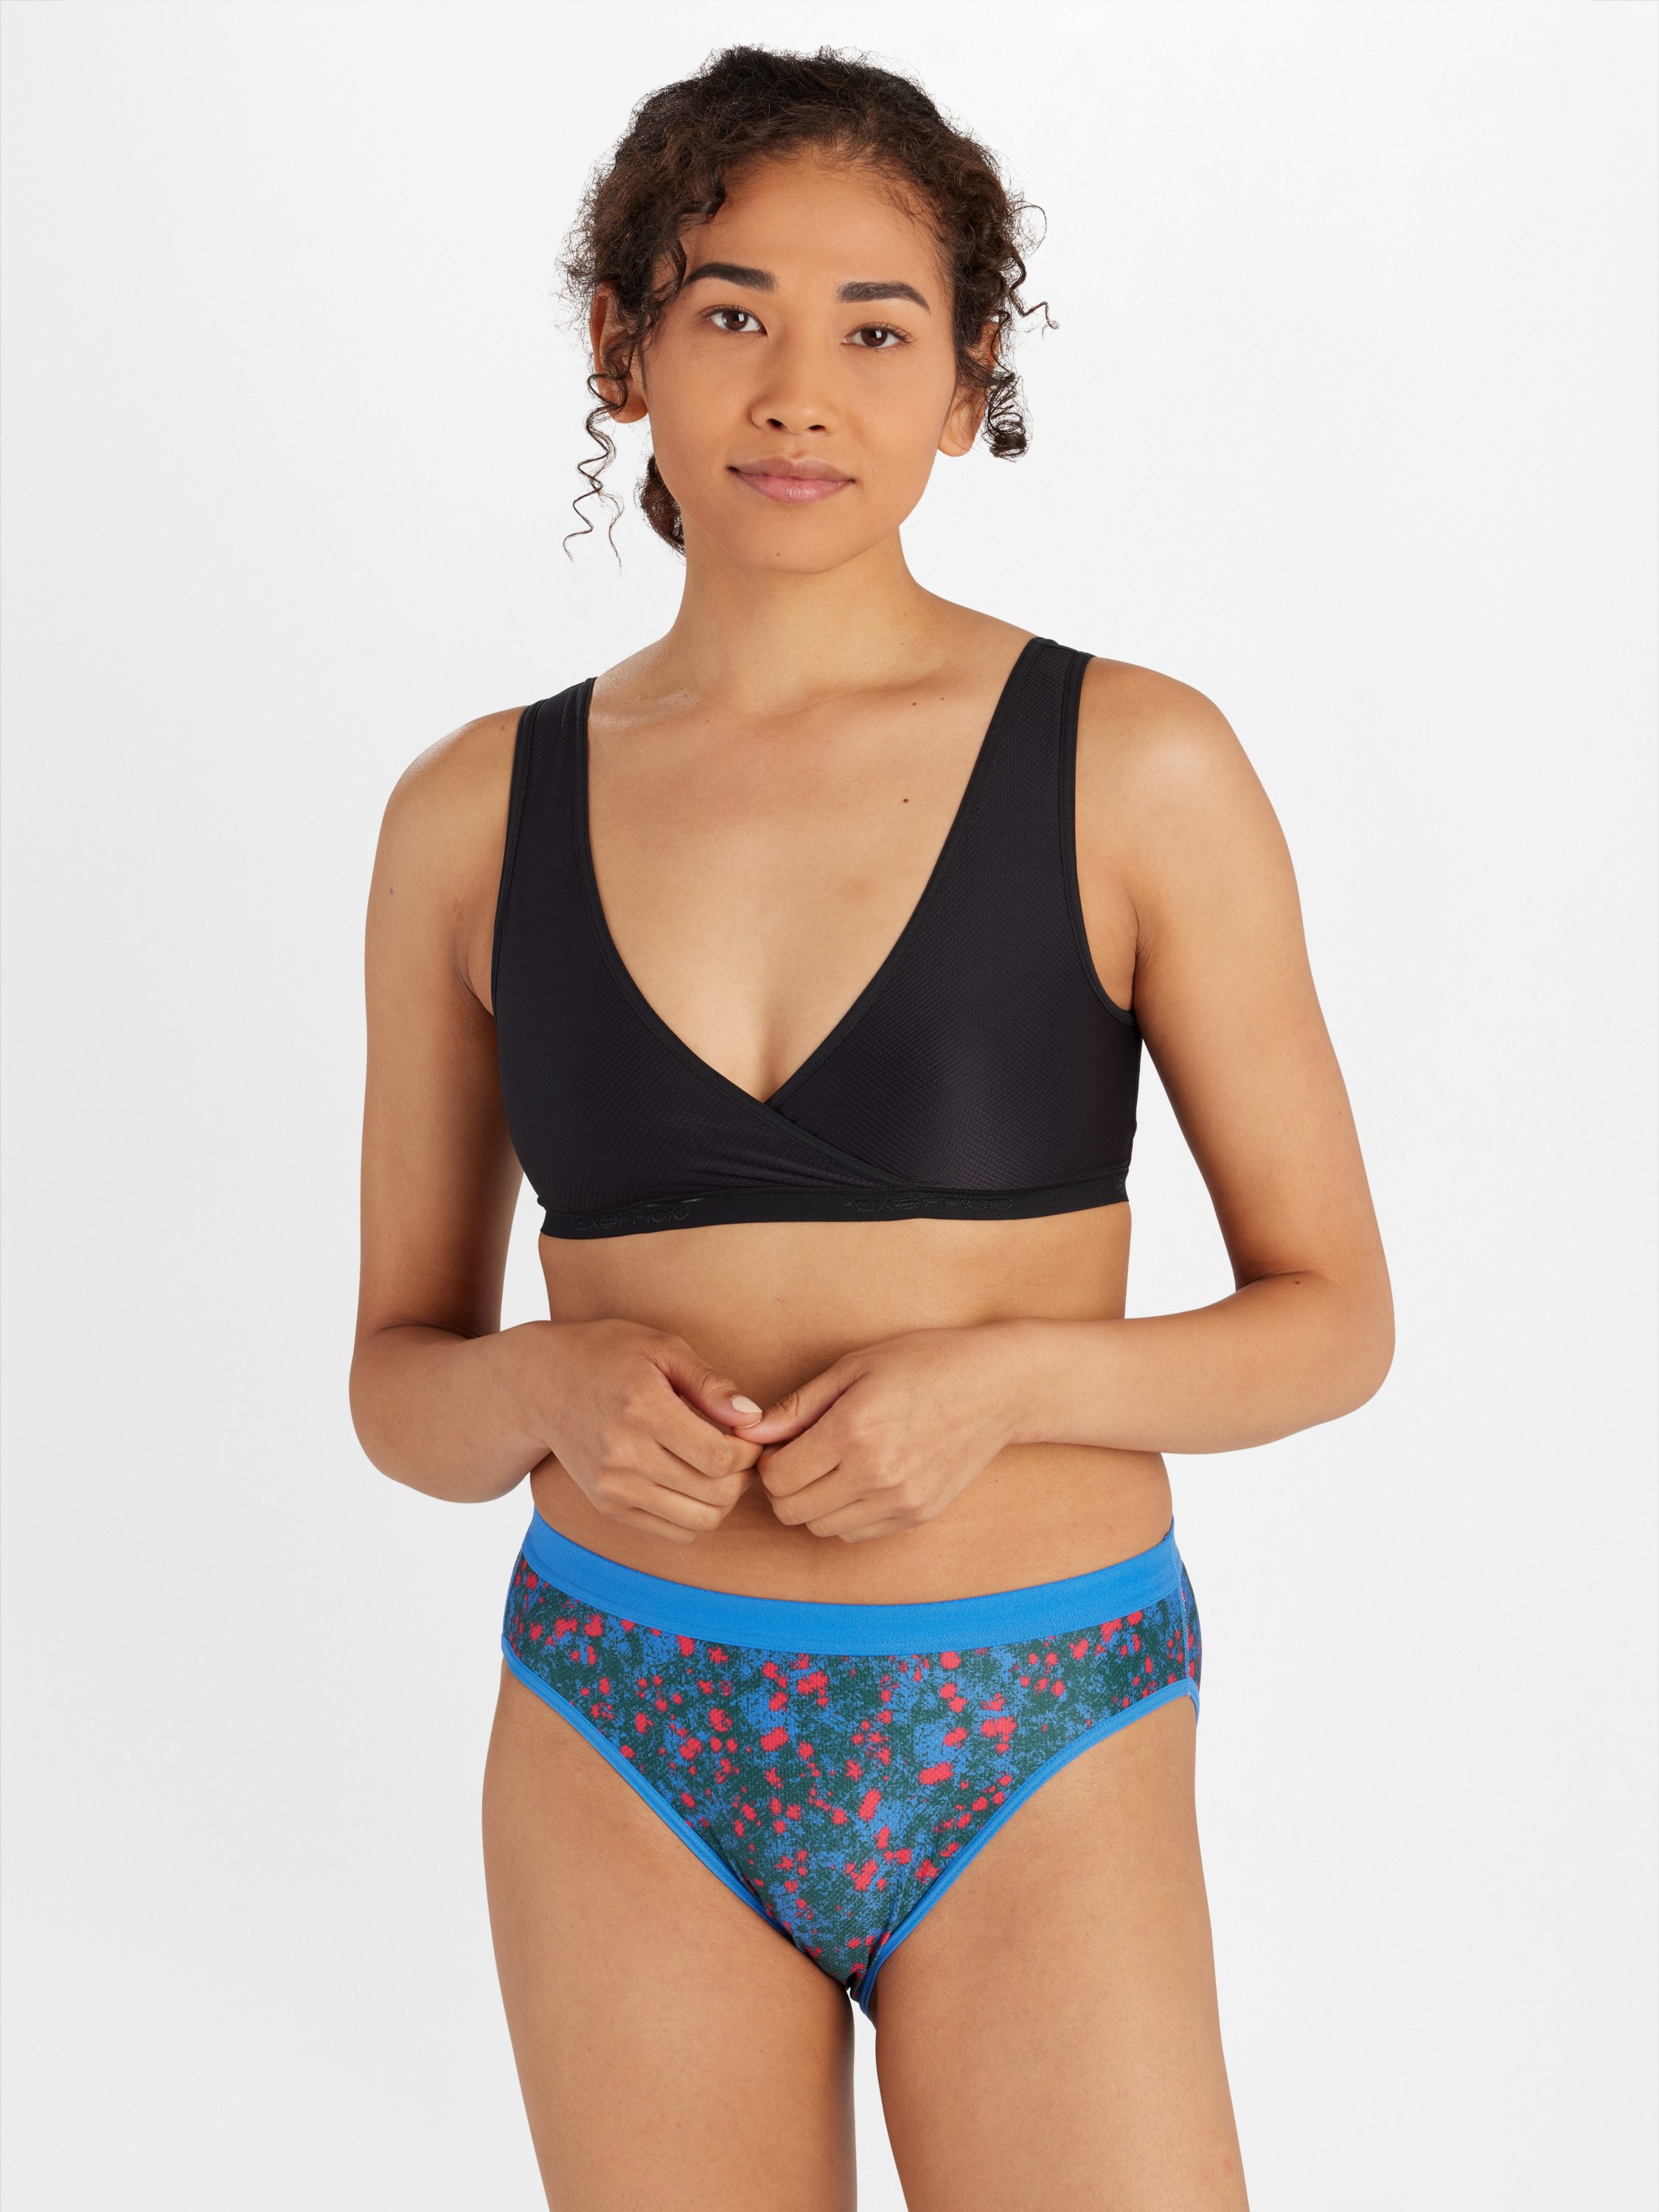 The cost of women's underwear: a pricey upgrade - Our Bill Pickle